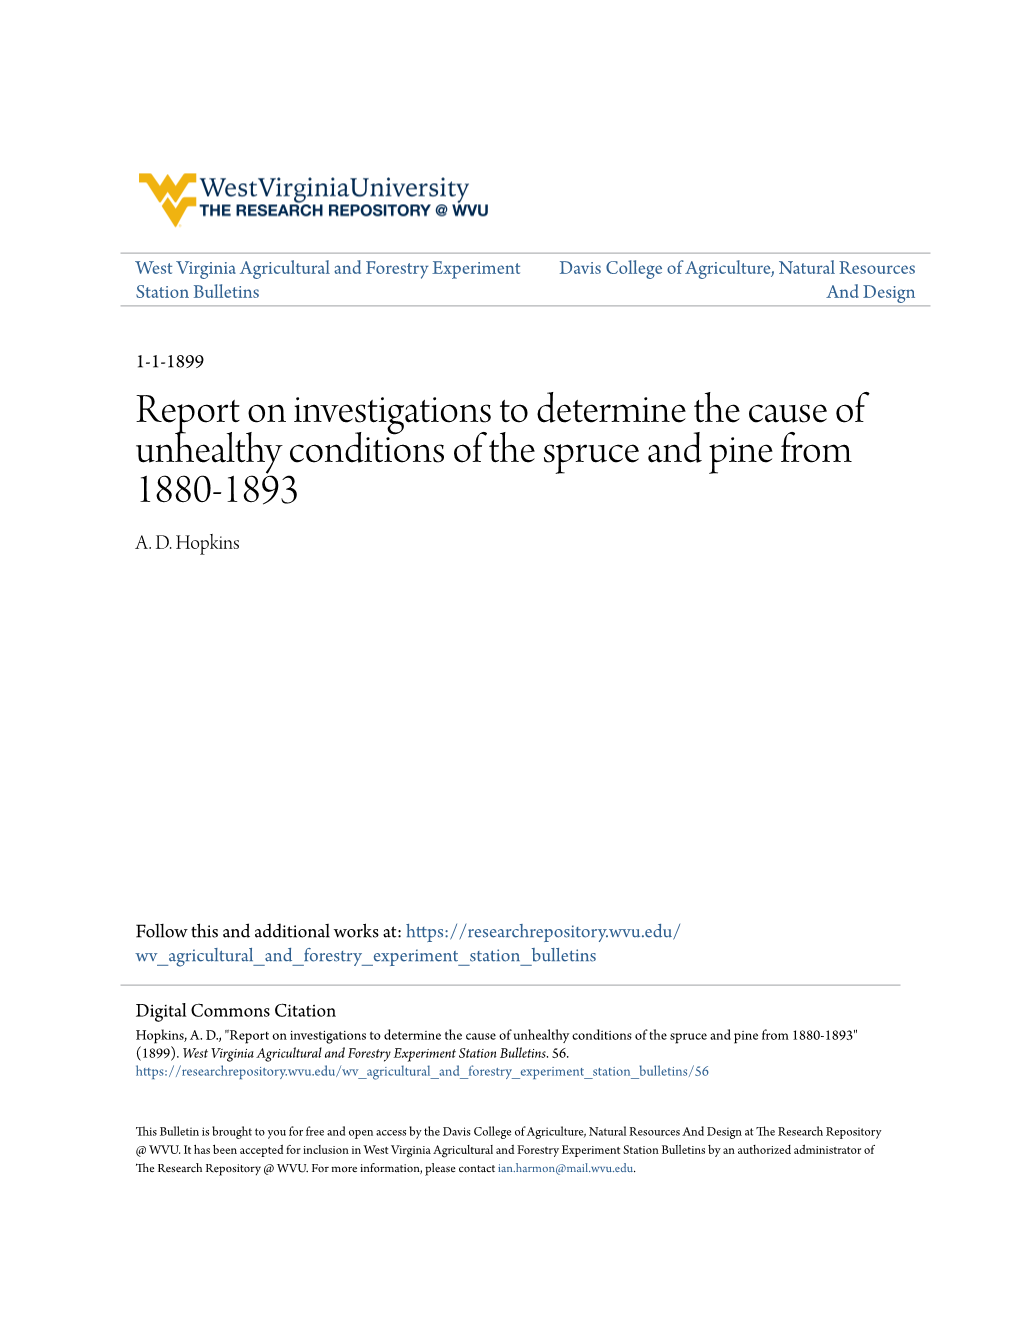 Report on Investigations to Determine the Cause of Unhealthy Conditions of the Spruce and Pine from 1880-1893 A